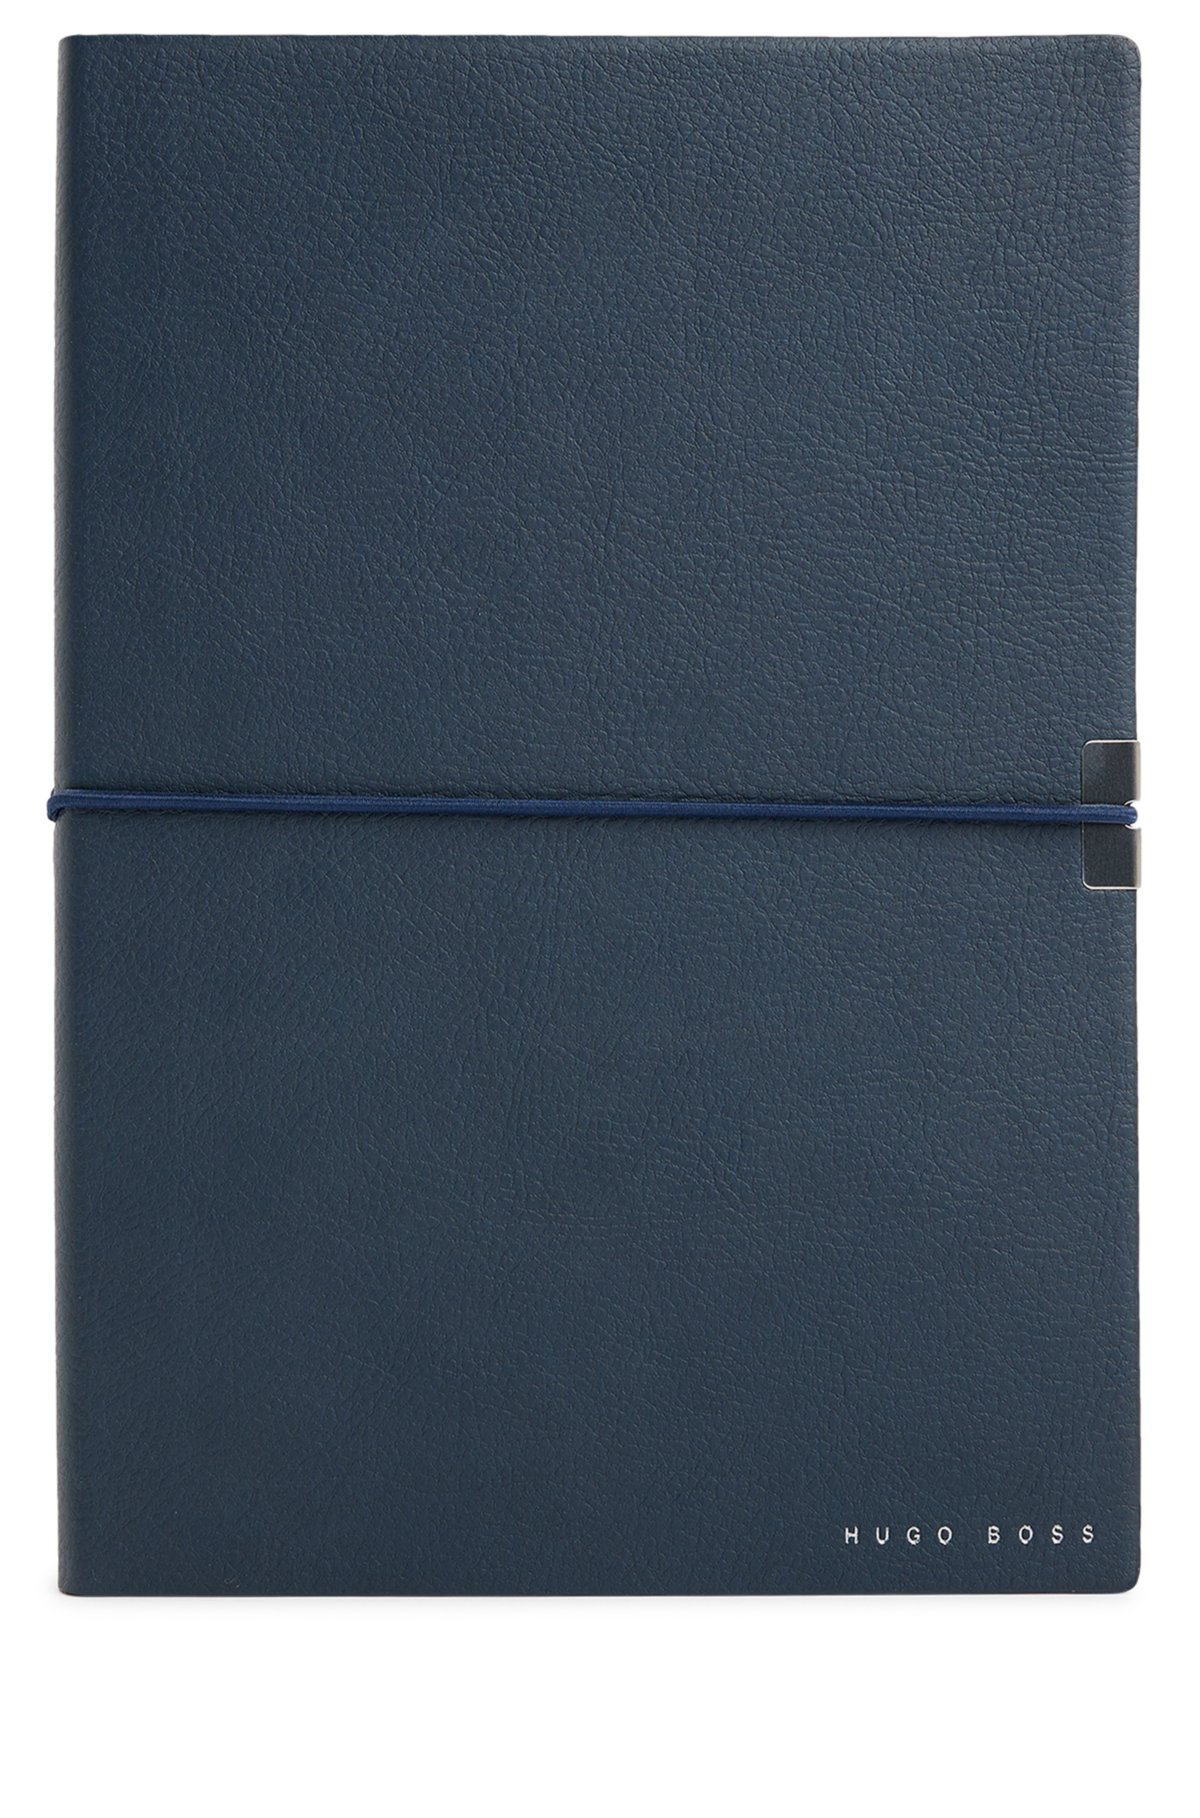 BOSS - Taccuino A5 in similpelle blu navy